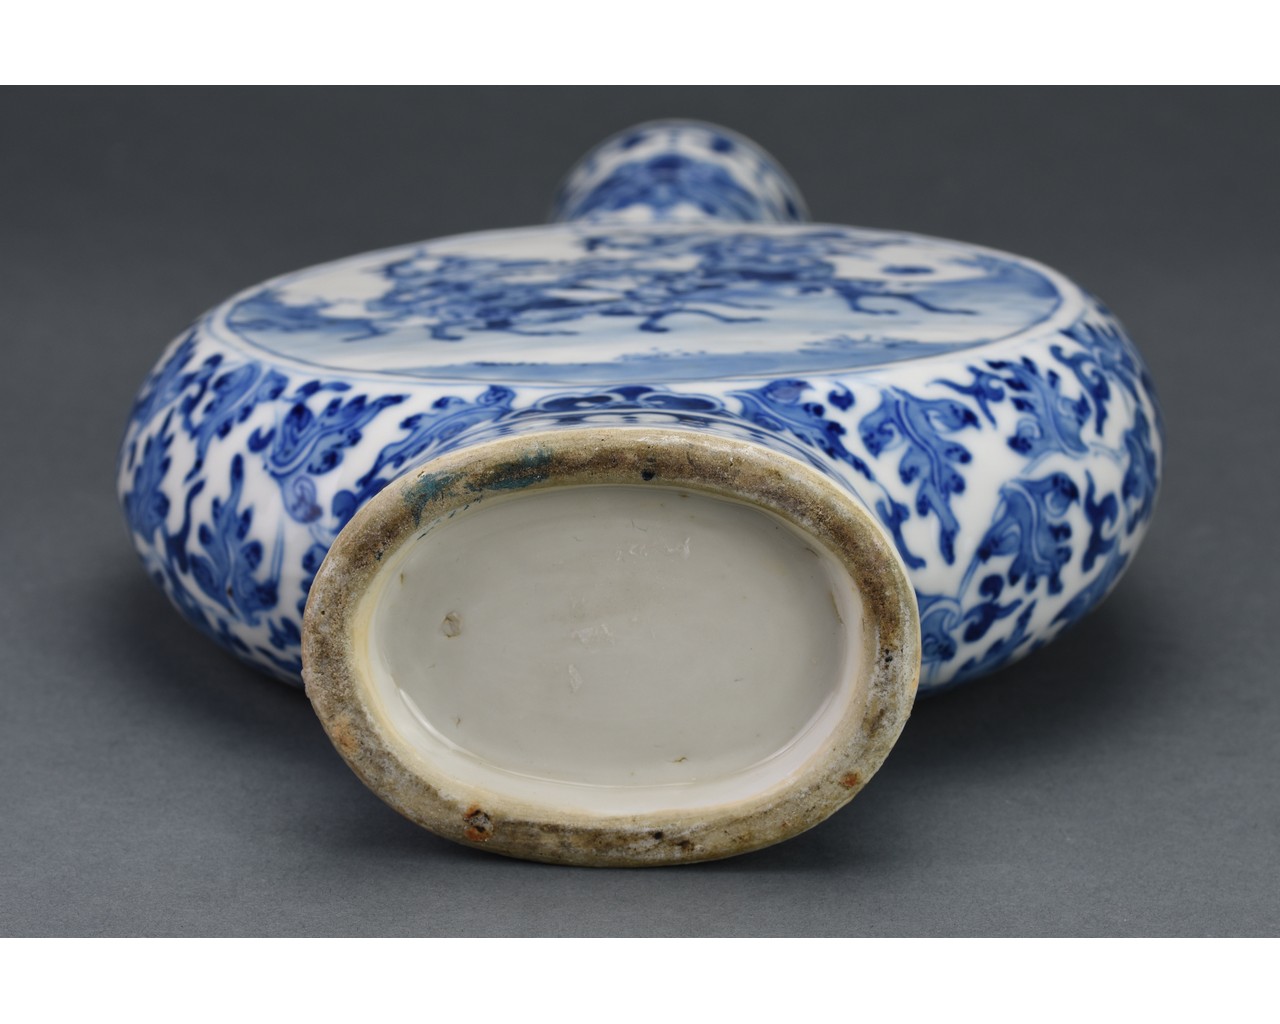 CHINESE BLUE AND WHITE PORCELAIN MOON FLASK - Image 6 of 6